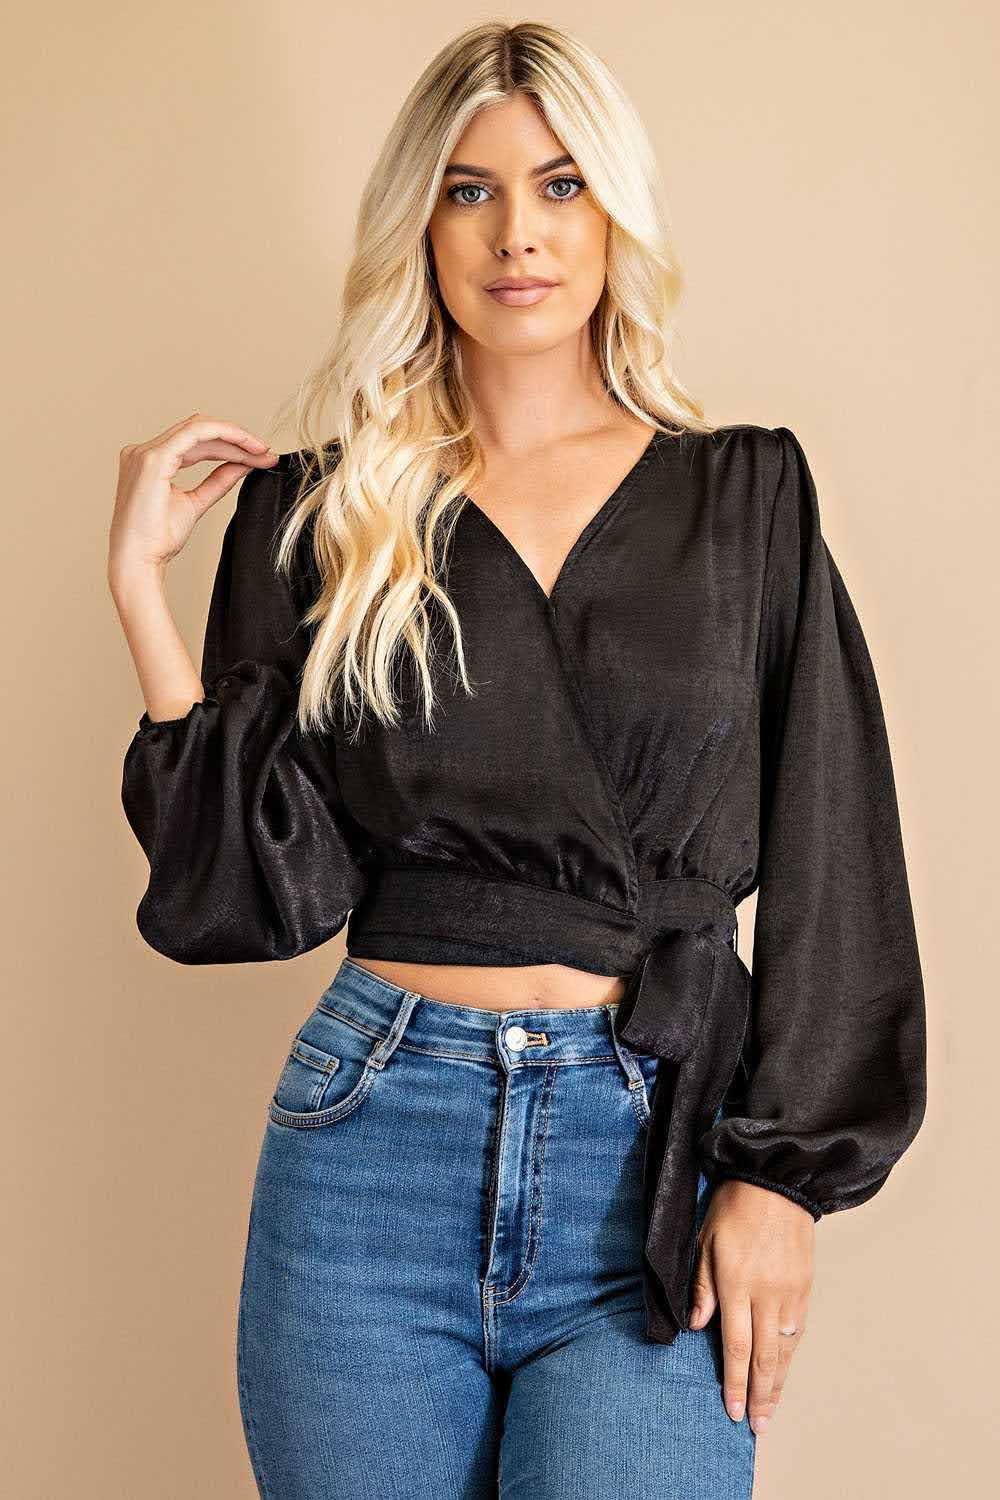 Effortlessly elevate your wardrobe with our Dina V-neck Front Tie Blouse in classic black. The snap button closure and 100% polyester fabric make it both stylish and comfortable, while the urban western, boho, cowgirl, and chic styles combine for a versatile and on-trend look. Embrace the boho-chic and bohemian vibes with this must-have piece. Model height: 5' 9".